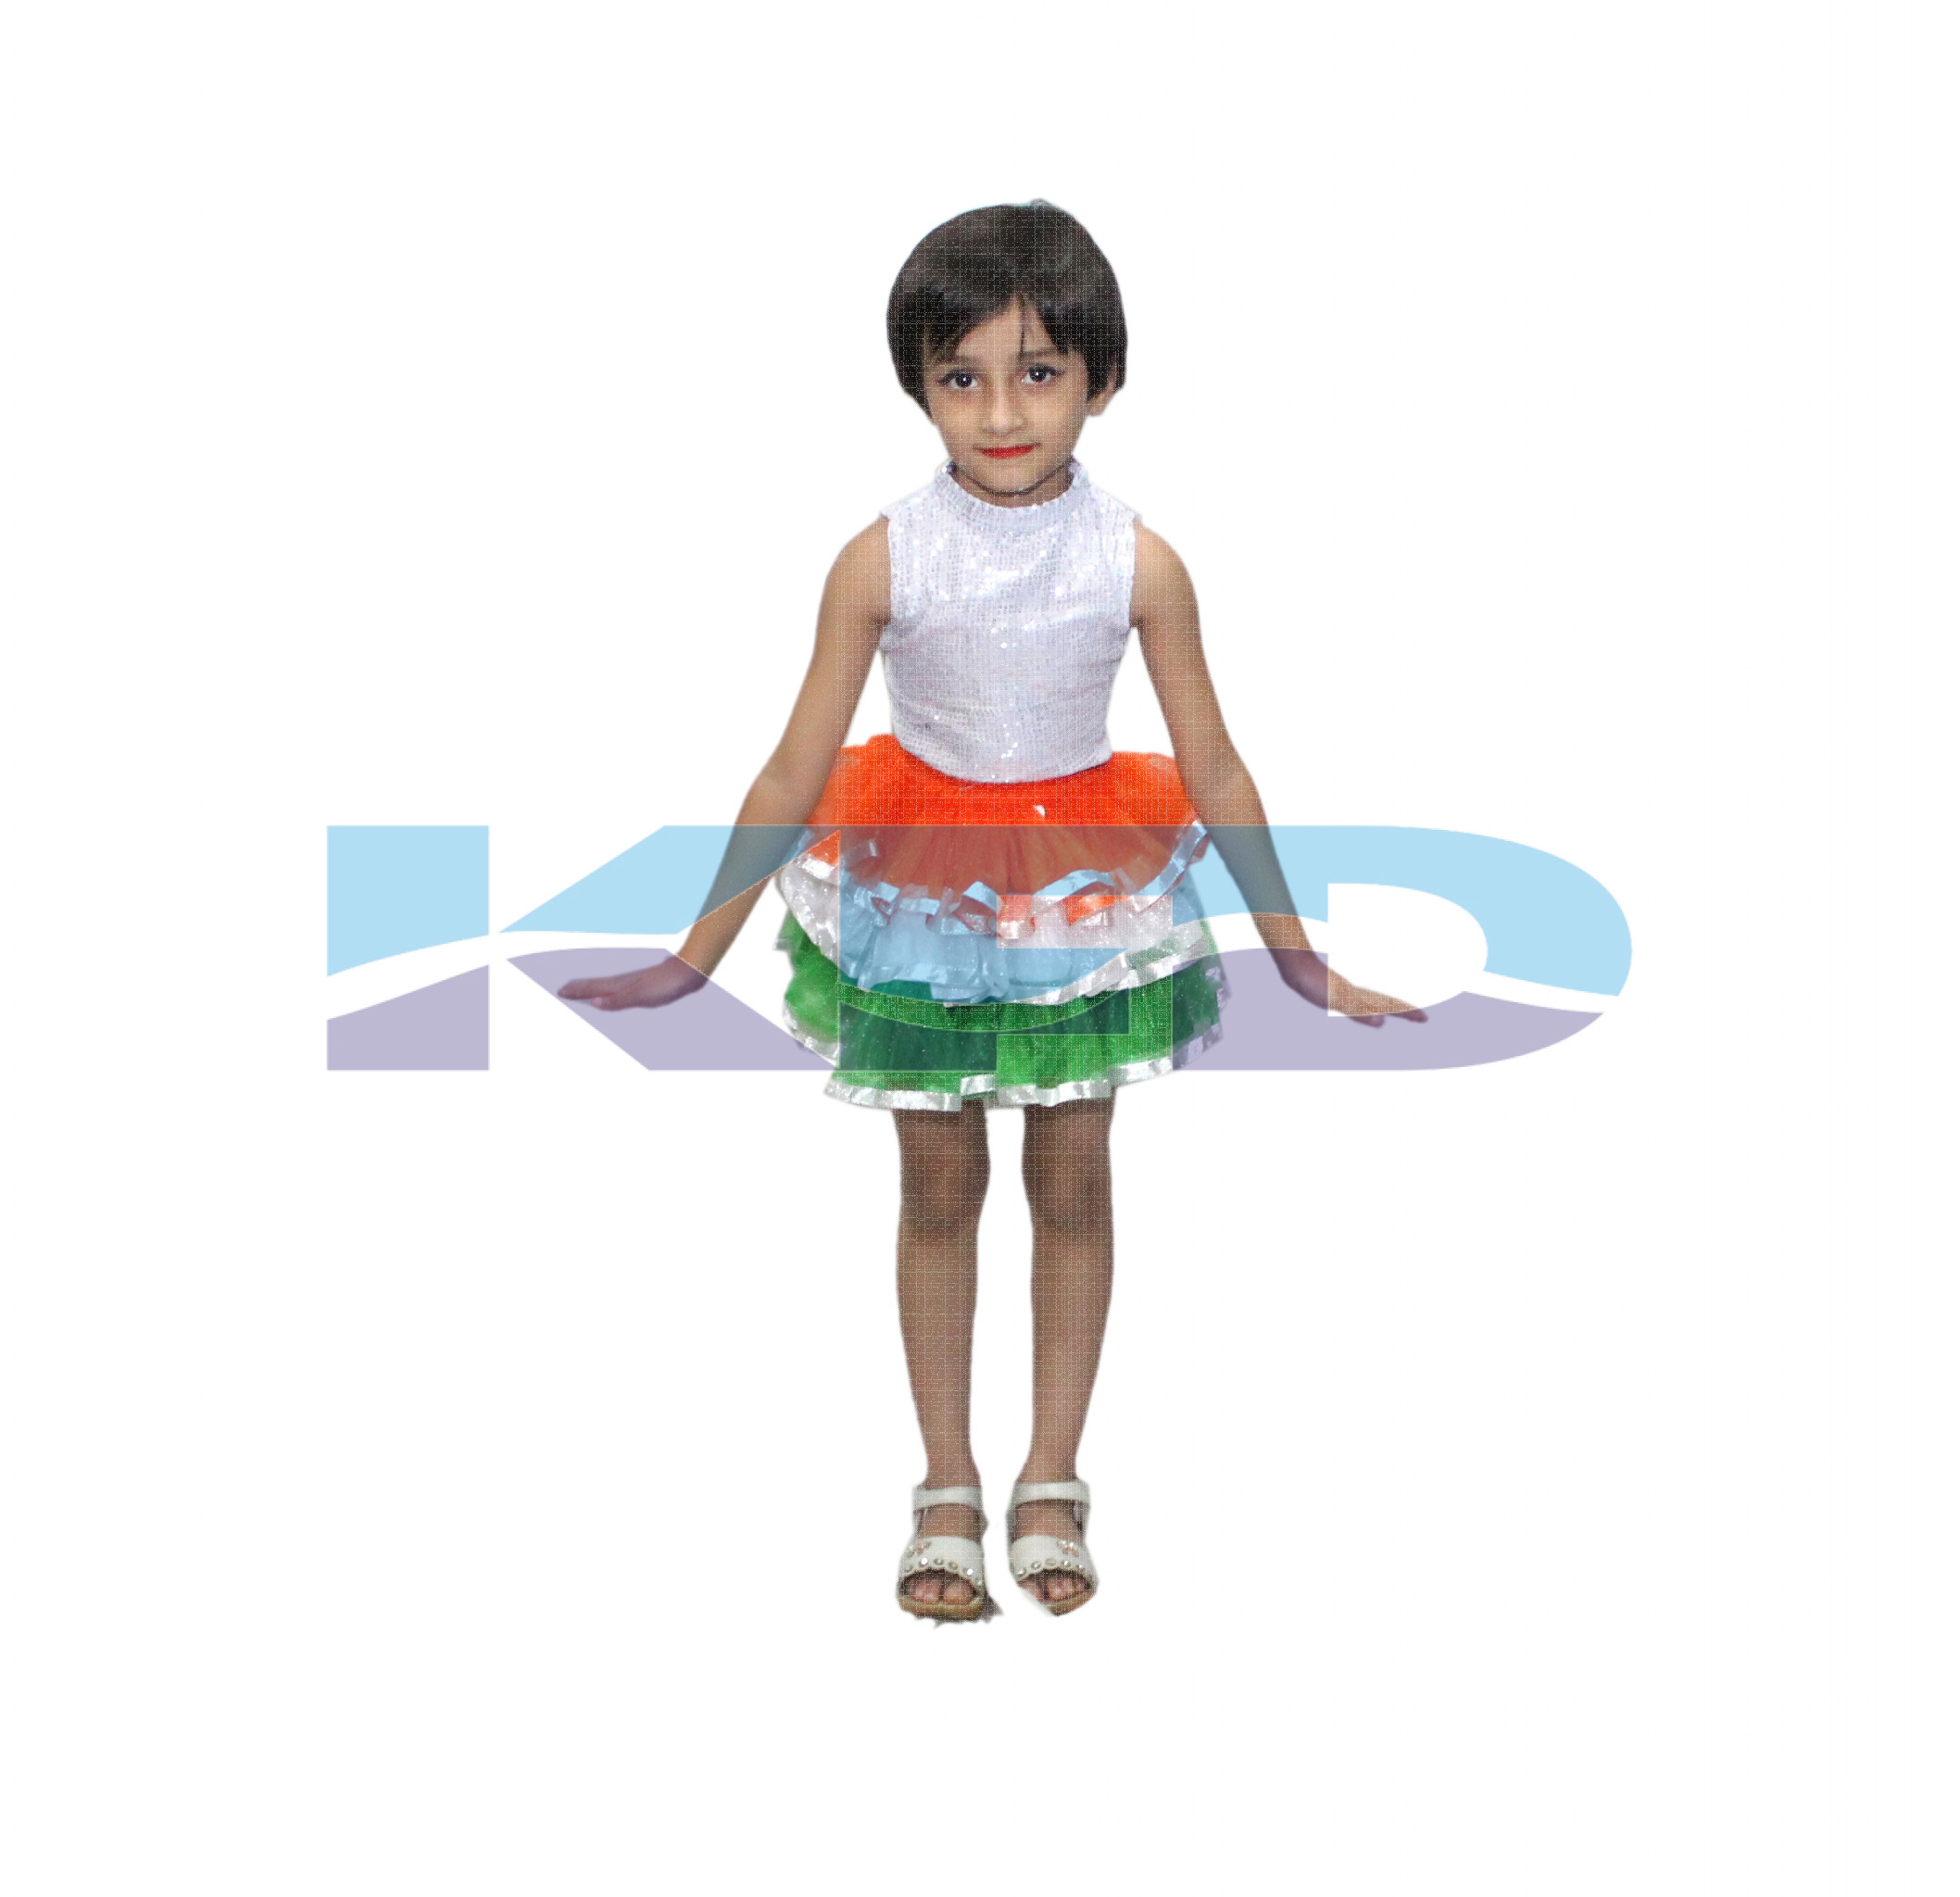 Tri Color Tu Tu Skirt Costume For Kids Western Dance/Independence Day Special/School Annual function/Theme Party/Competition/Stage Shows/Birthday Party Dress